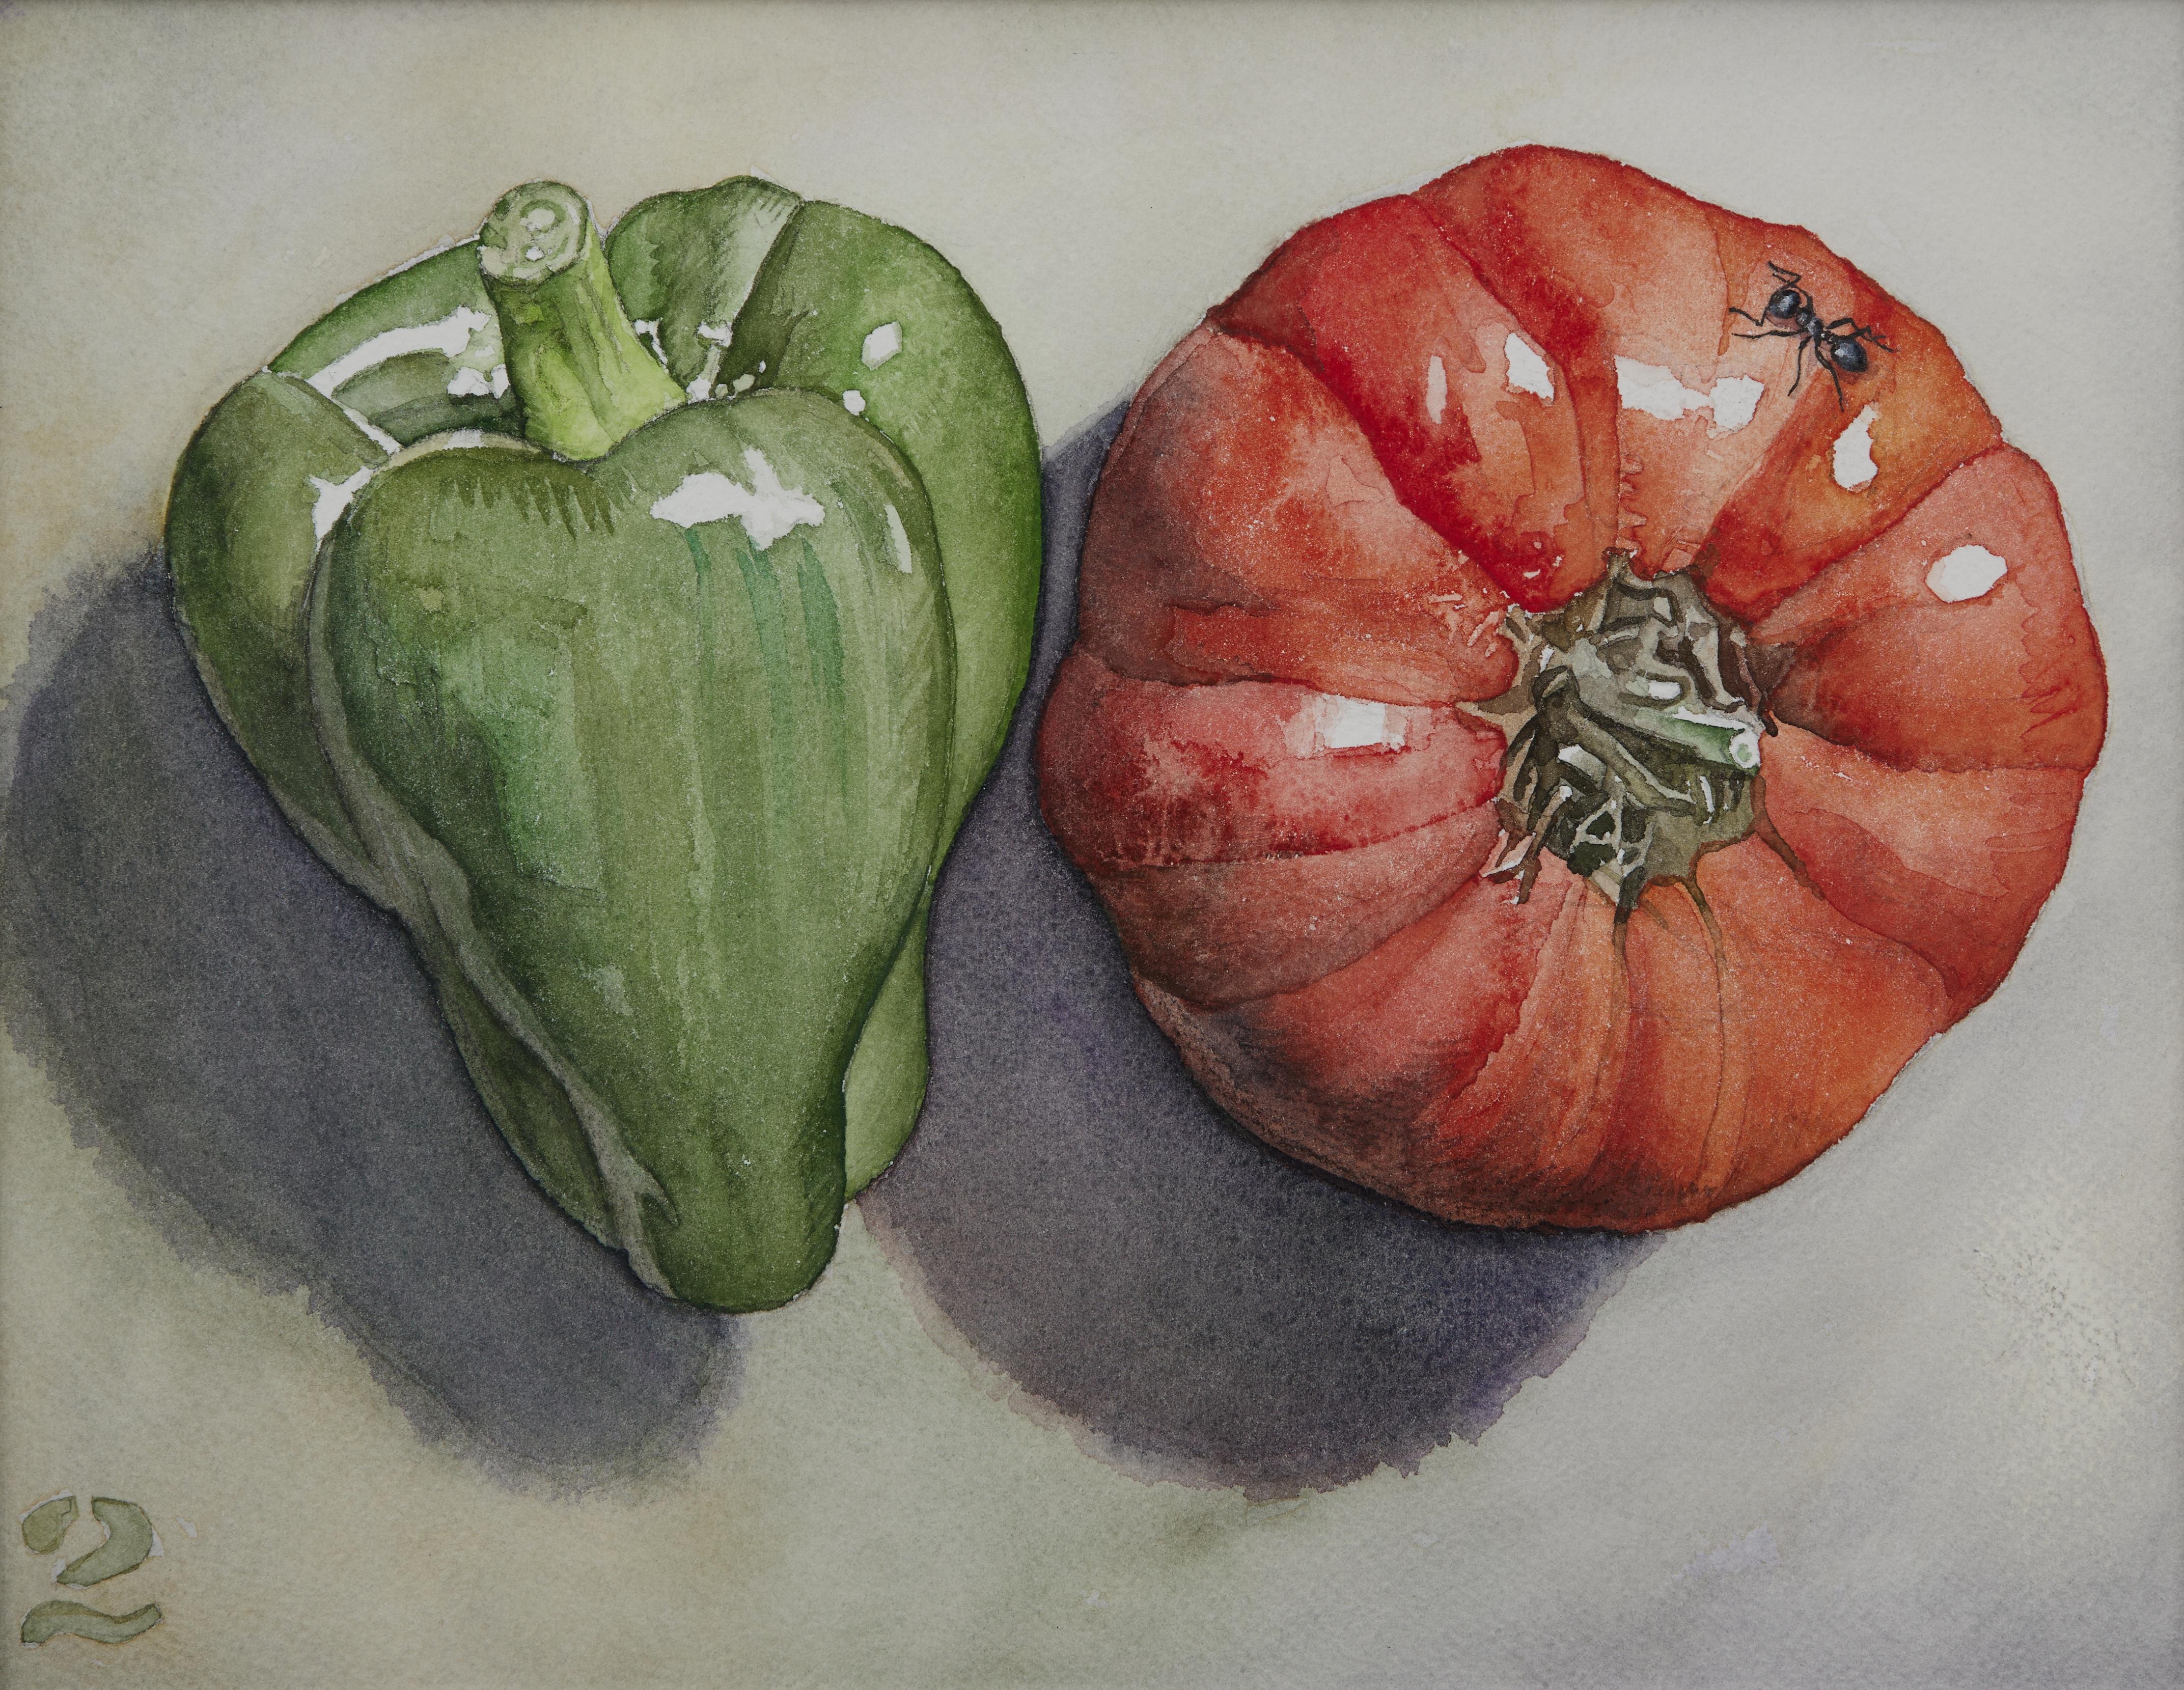 Vegetable Still Life No. 2, Contemporary watercolor by Ohio trompe l'oeil artist - Photorealist Art by George Mauersberger